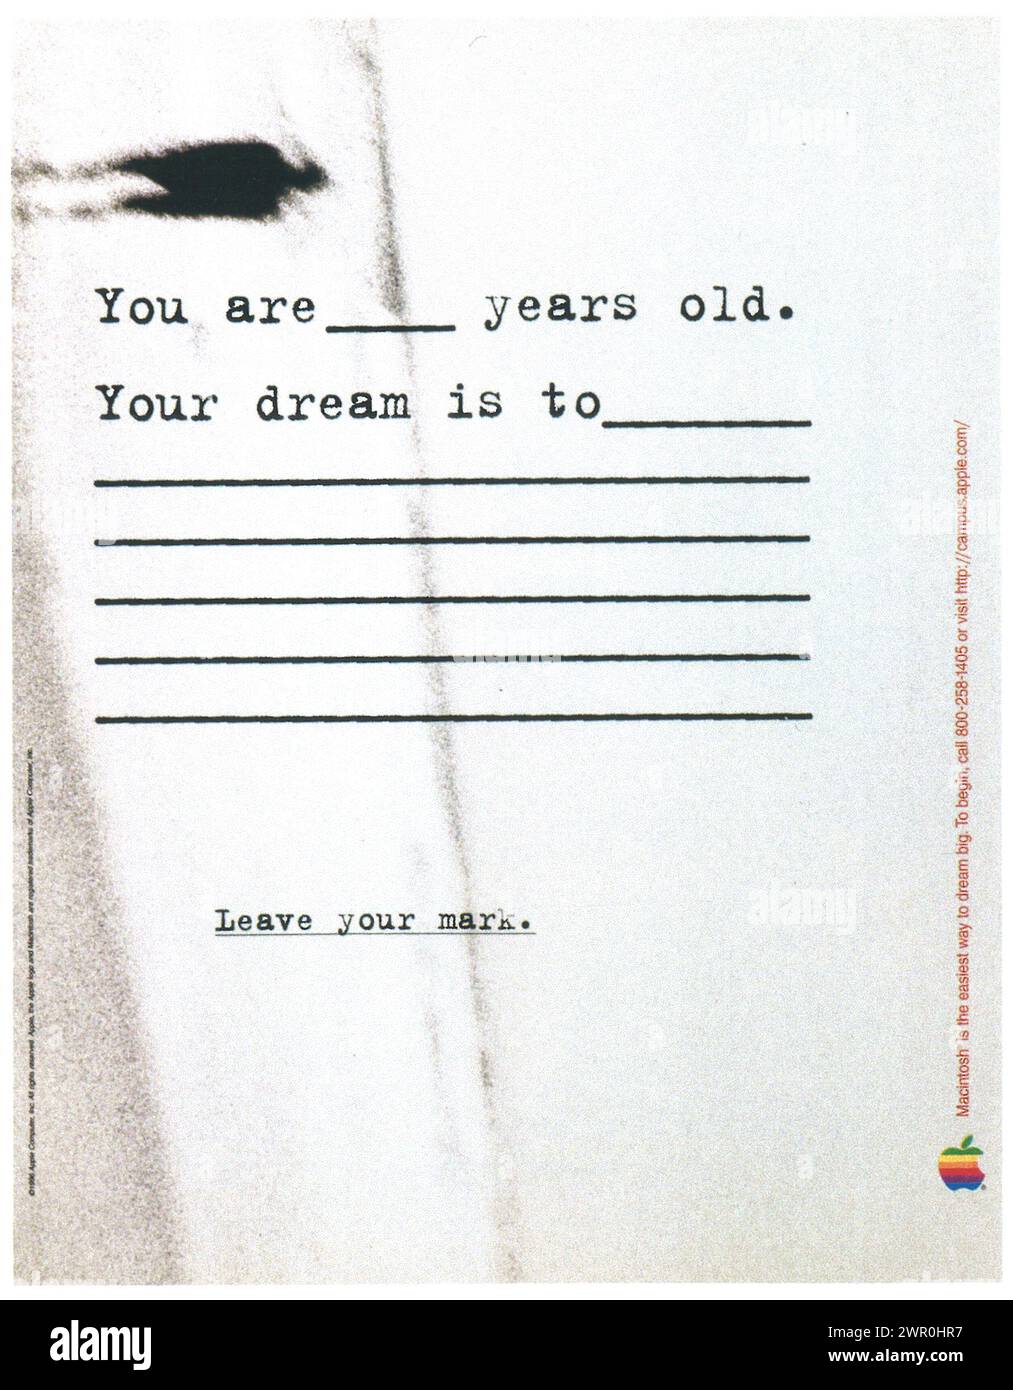 1996 Apple Macintosh ad 'Your dream is to...' Stock Photo